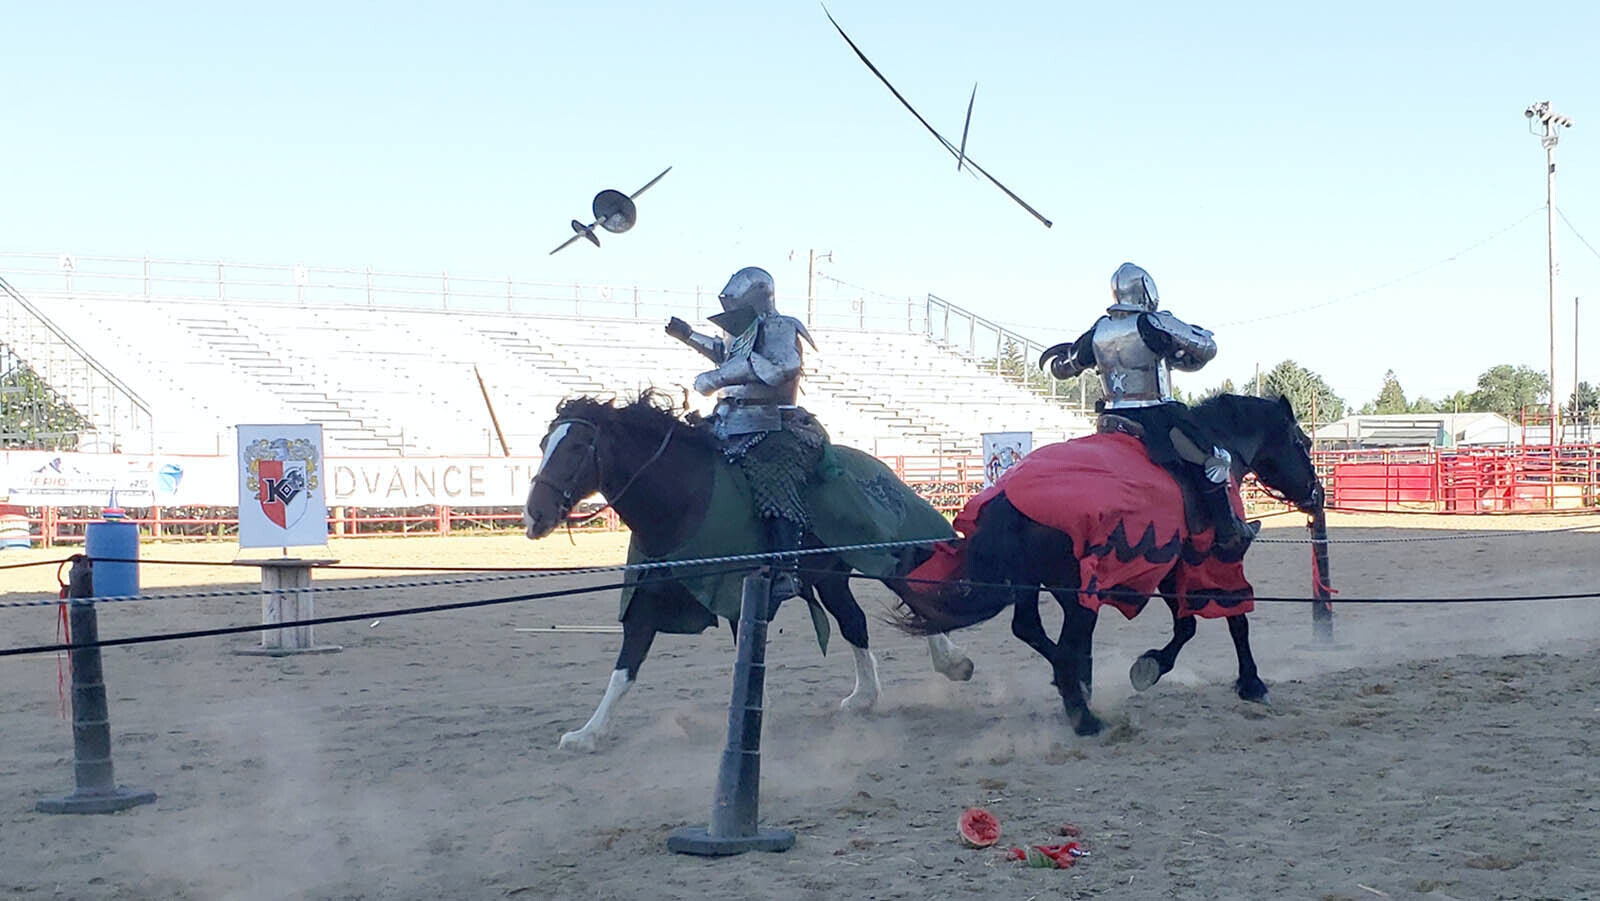 Lances fly after impact during jousting.